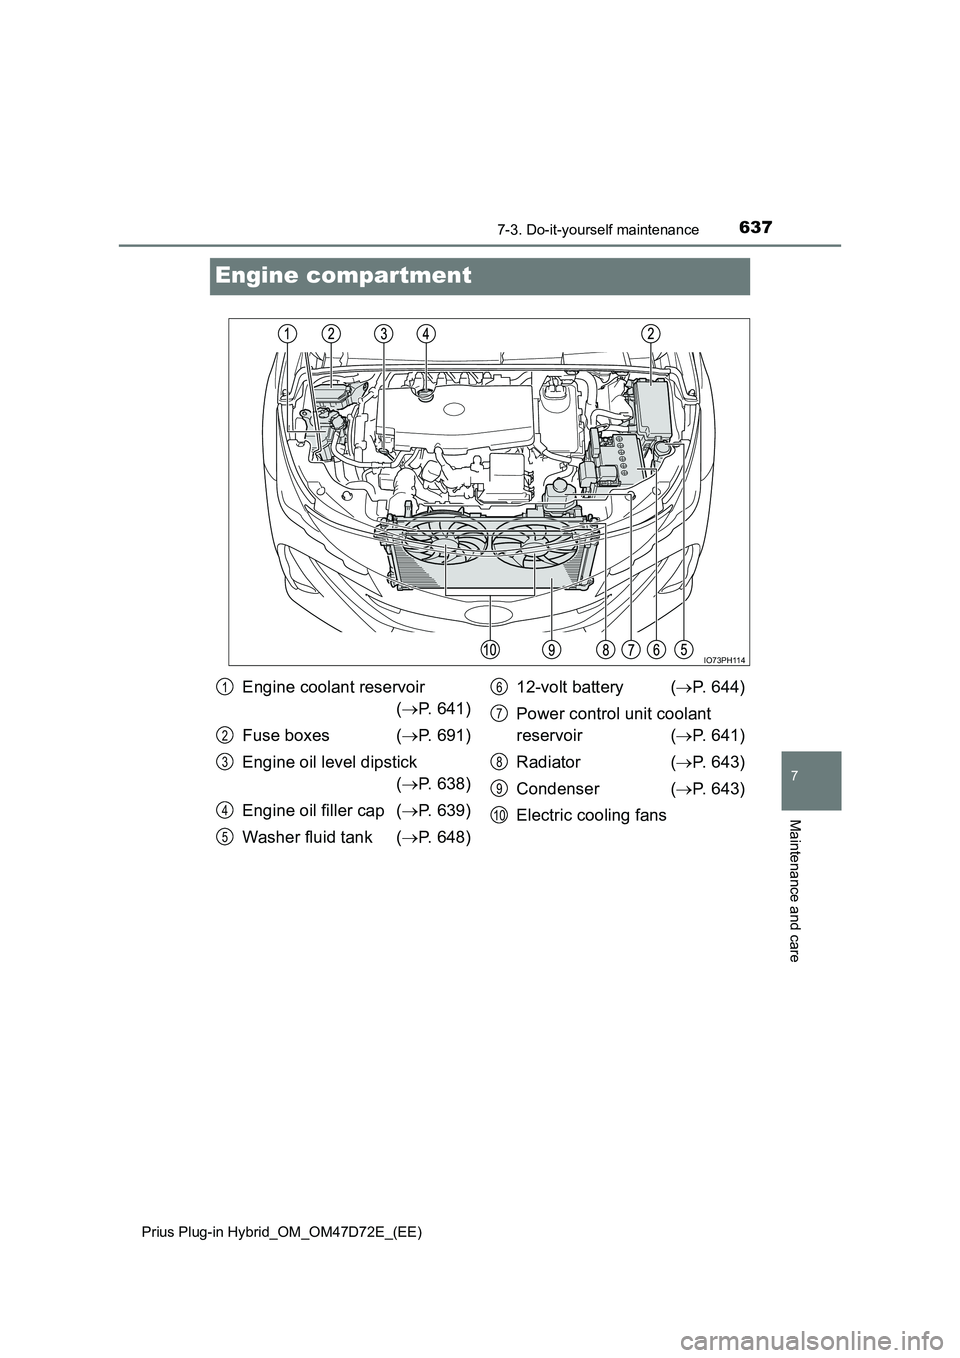 TOYOTA PRIUS PLUG-IN HYBRID 2020  Owners Manual 6377-3. Do-it-yourself maintenance 
Prius Plug-in Hybrid_OM_OM47D72E_(EE)
7
Maintenance and care
Engine compartment
IO73PH114
Engine coolant reservoir 
( P. 641) 
Fuse boxes ( P. 691) 
Engine oi